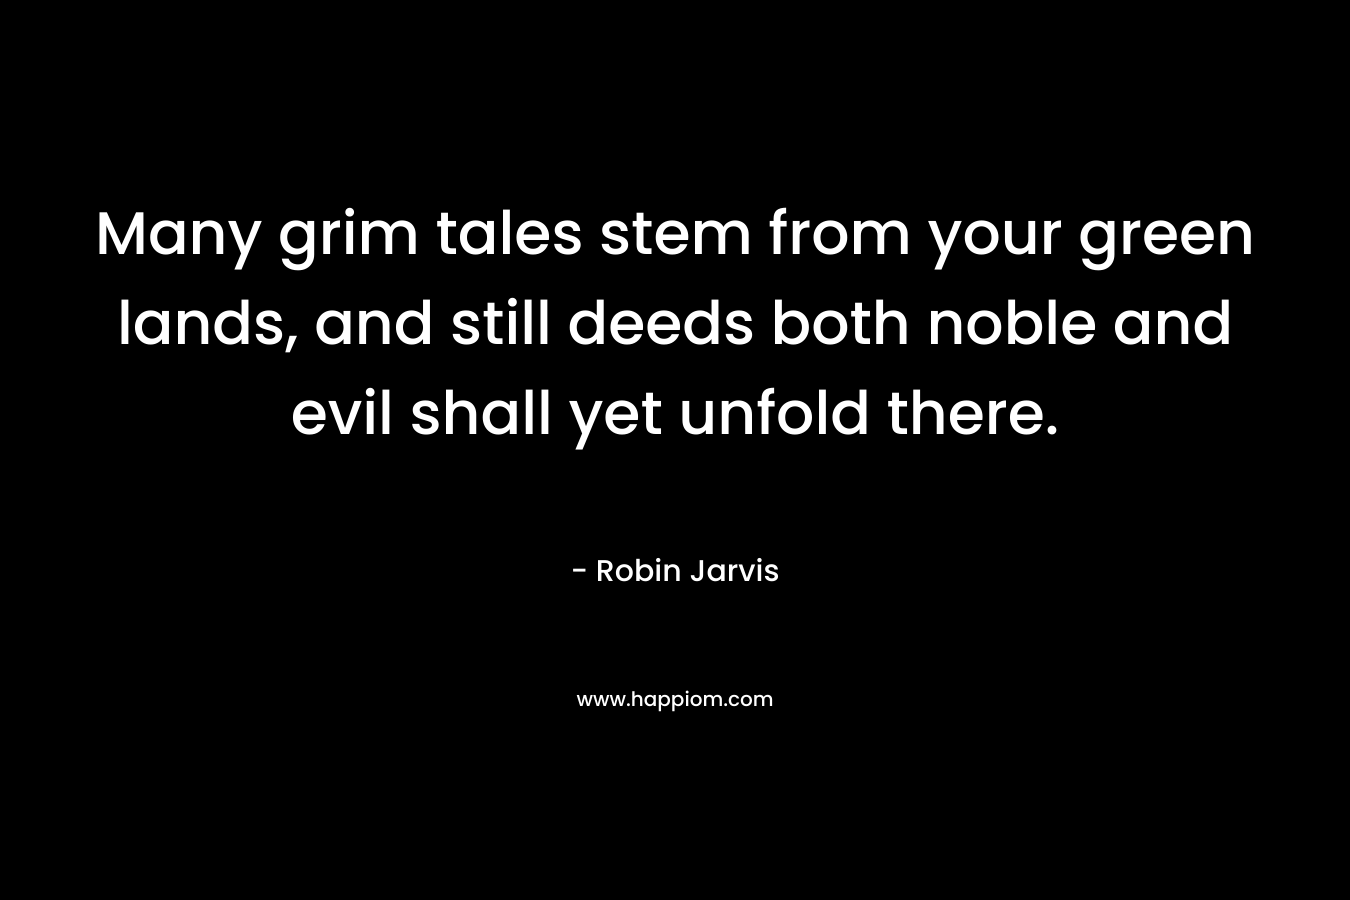 Many grim tales stem from your green lands, and still deeds both noble and evil shall yet unfold there.